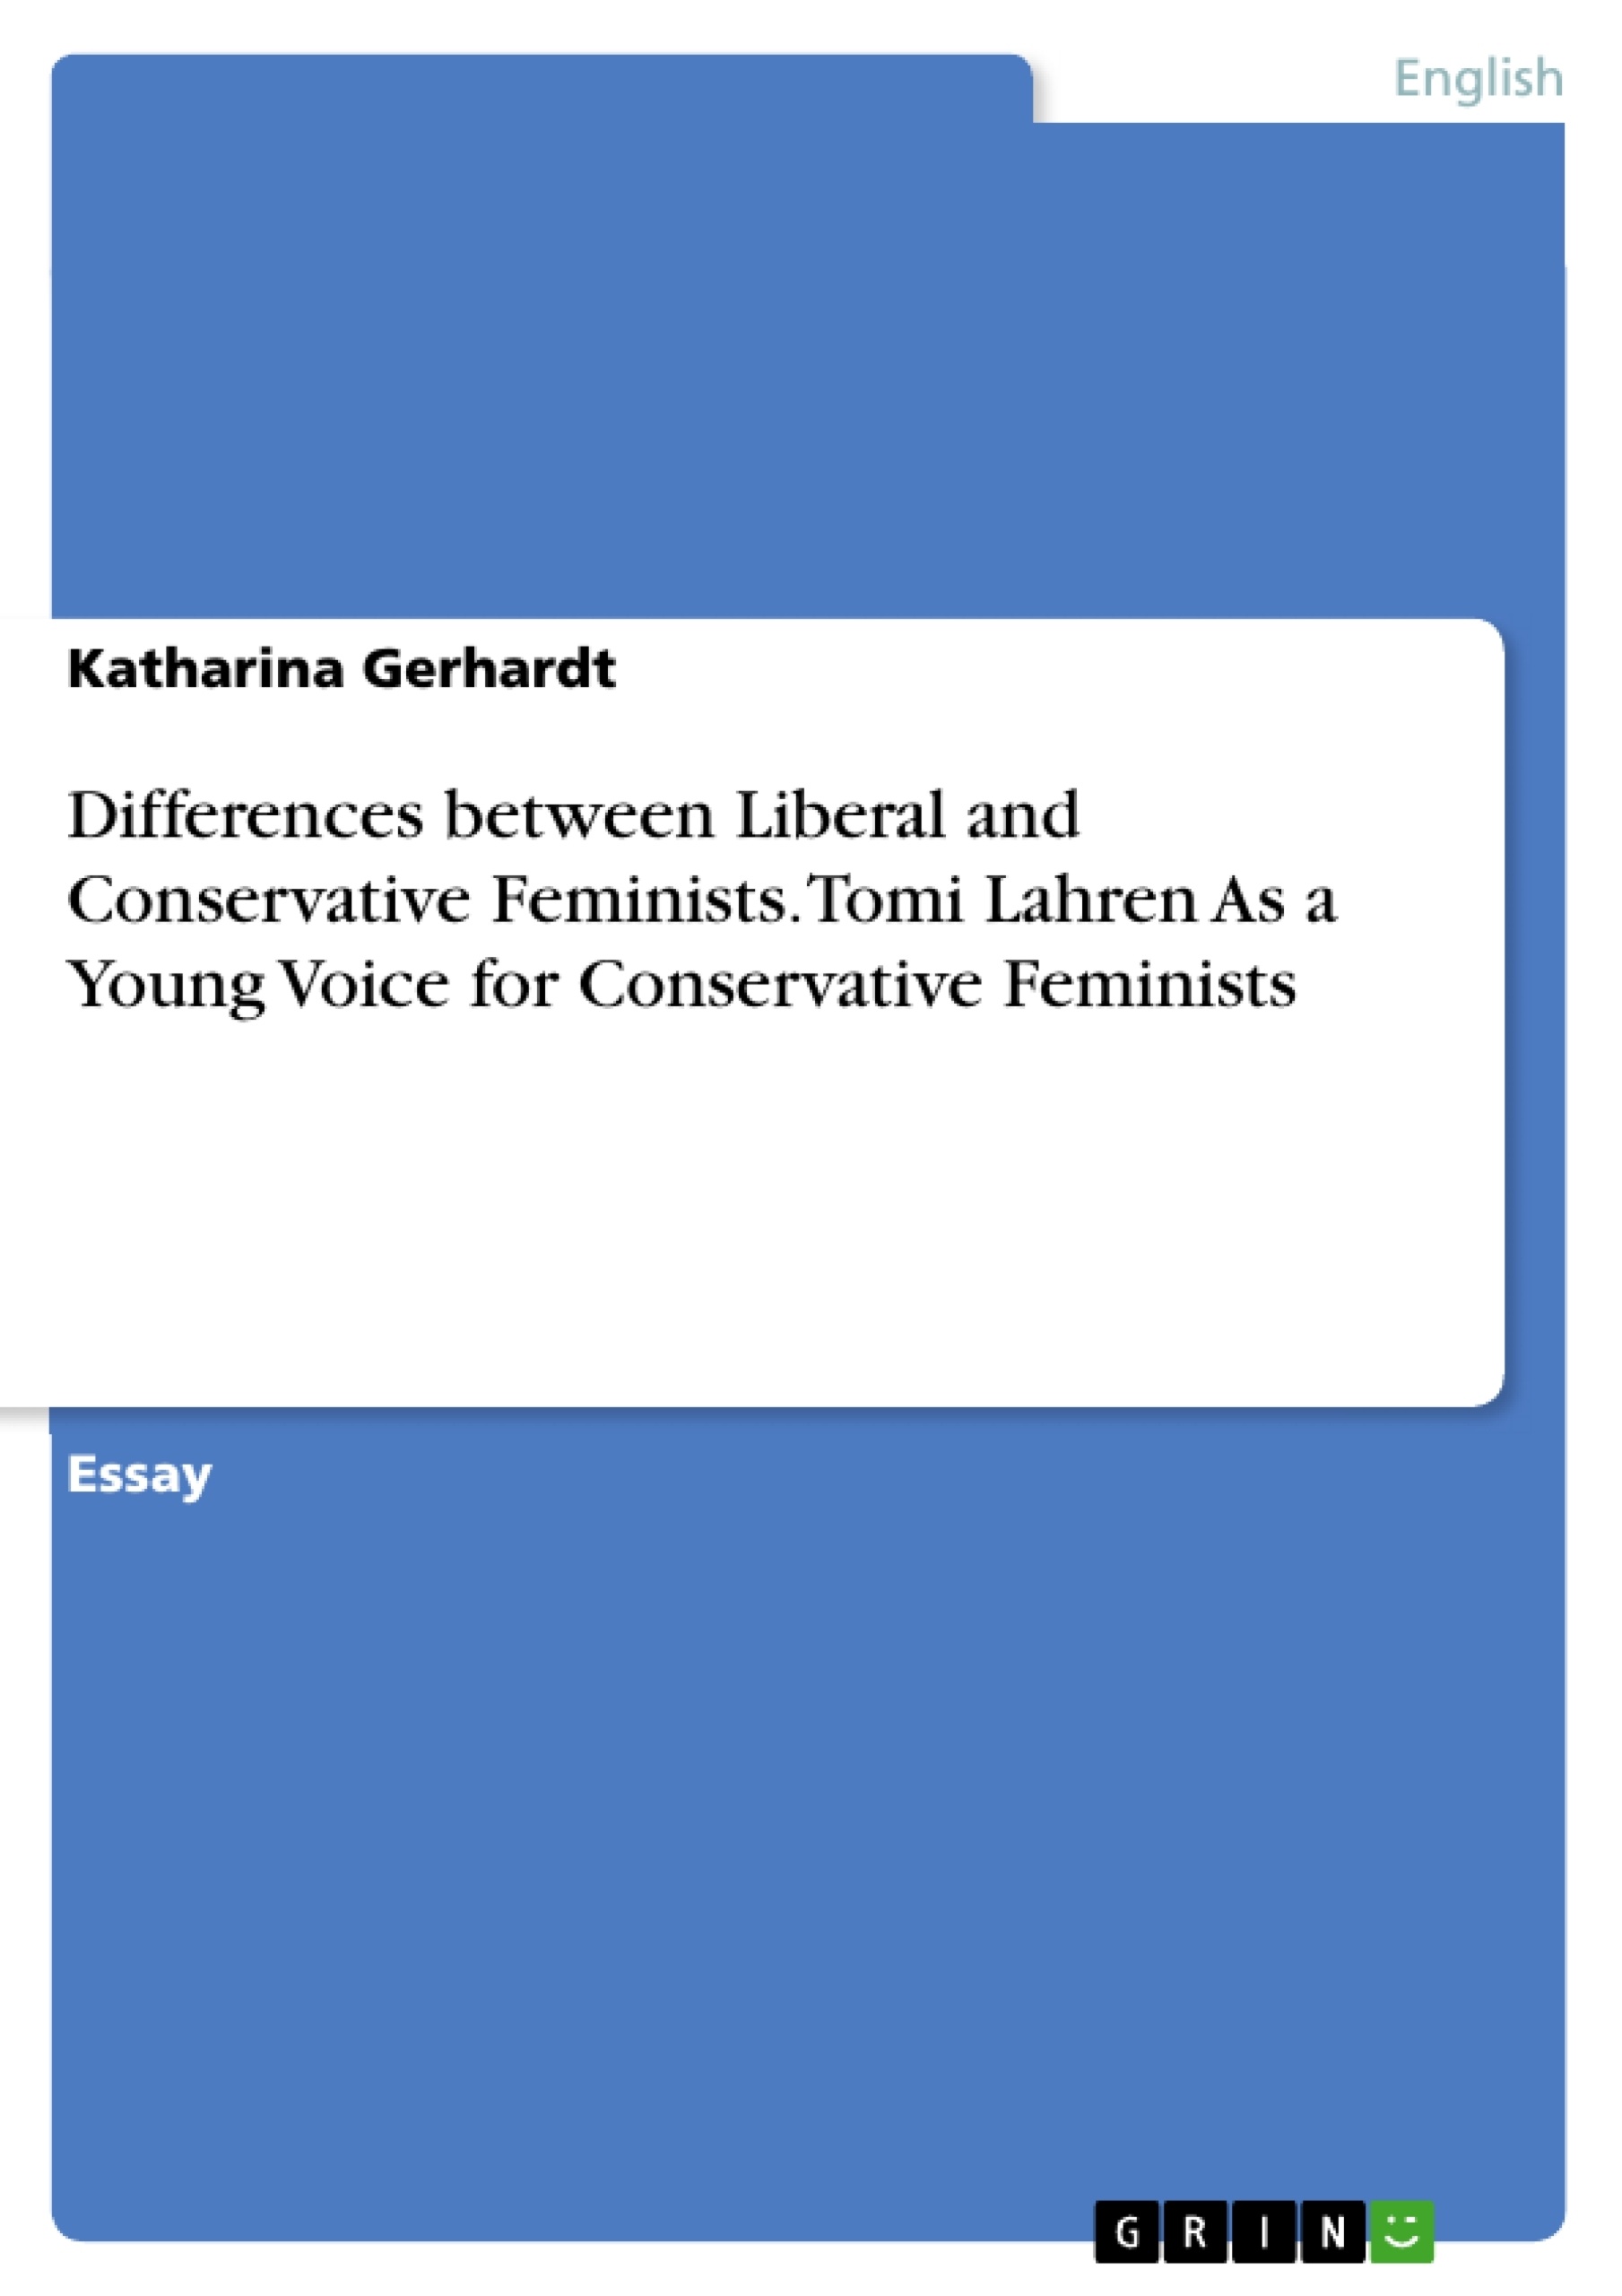 Titre: Differences between Liberal and Conservative Feminists. Tomi Lahren As a Young Voice for Conservative Feminists